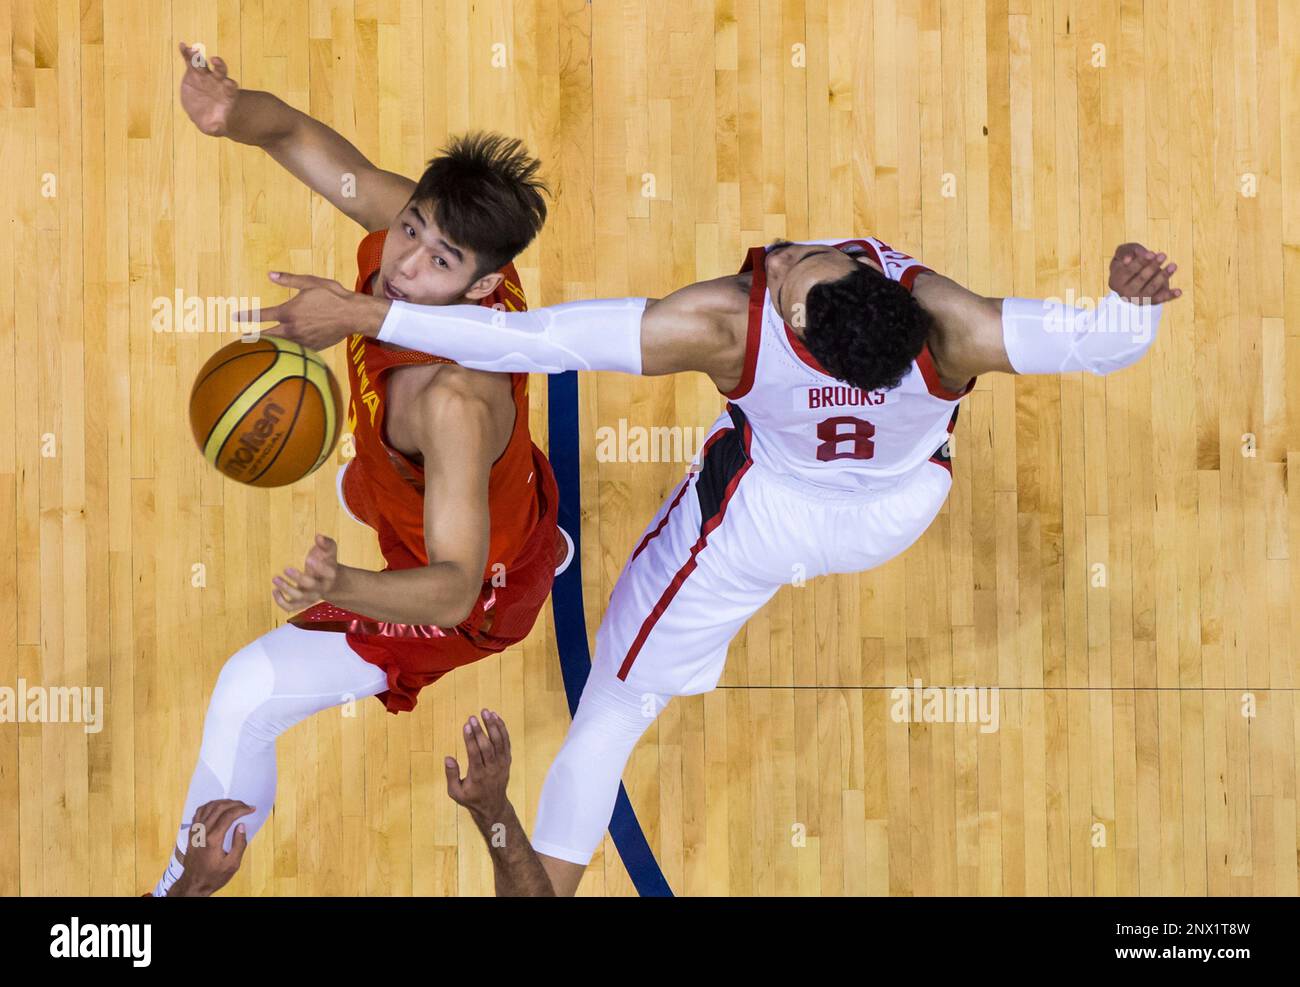 China's Wenbo Lu, left, and Canada's Dillon Brooks vie for a rebound during  first half Pacific Rim Basketball Classic action in Vancouver on Friday  June 22, 2018. (Darryl Dyck/The Canadian Press via